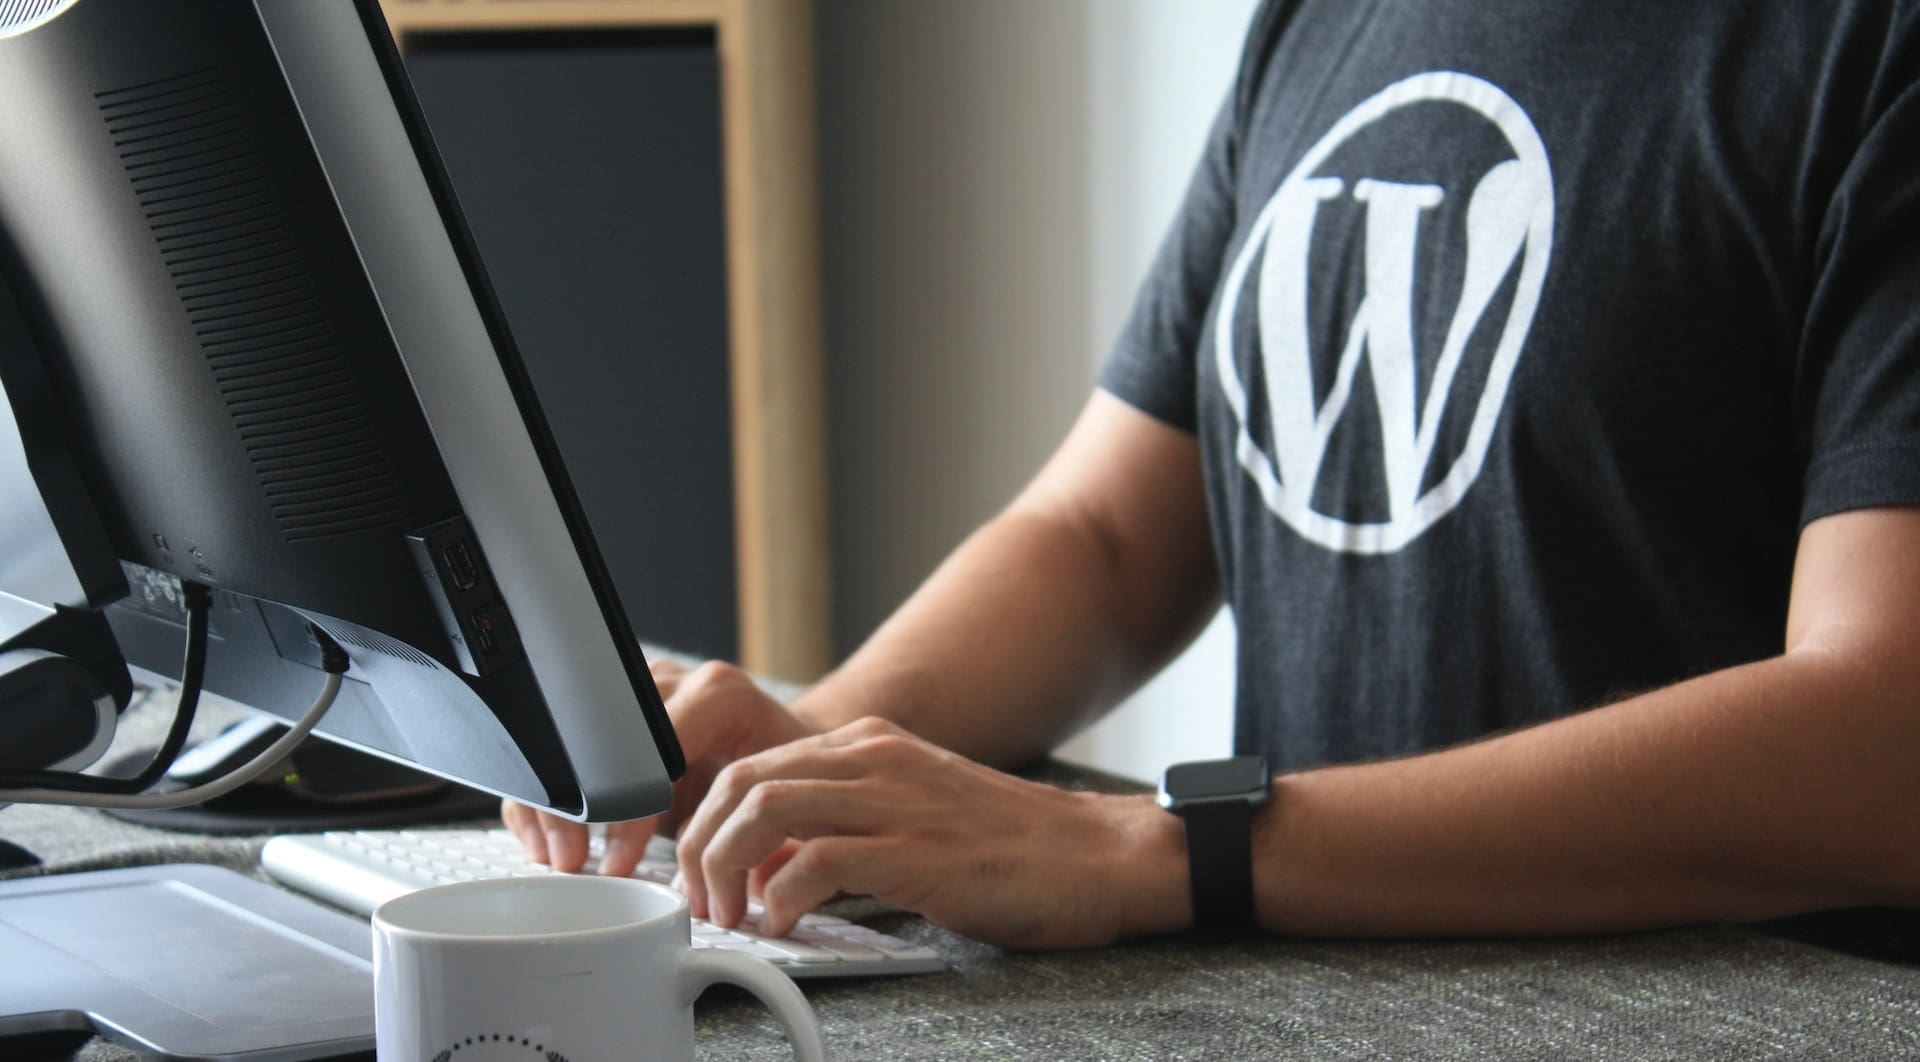 a man wearing a WordPress branded t-shirt sat in front of a computer monitor